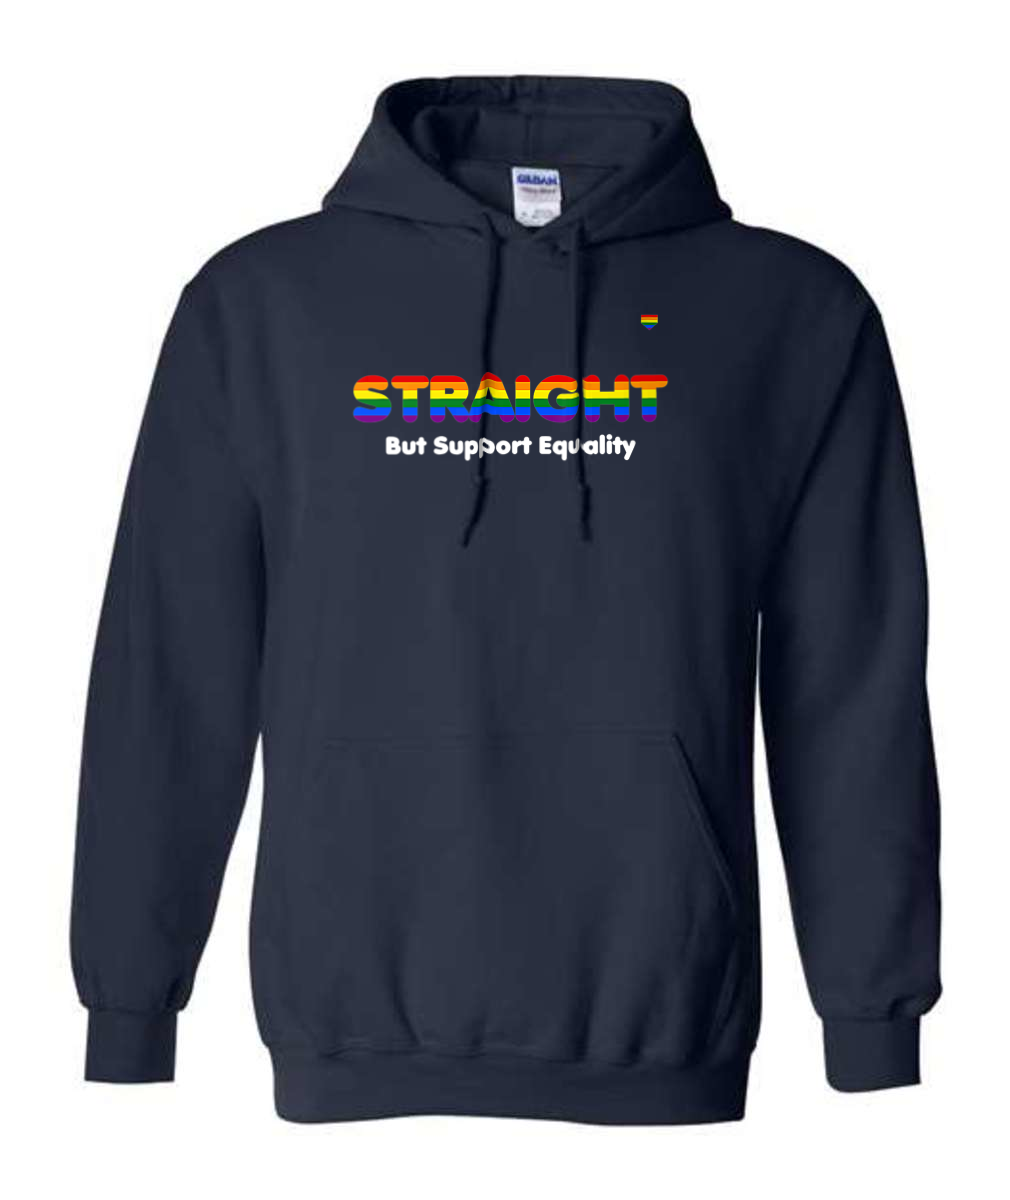 Dale Scott Support Equality Hoodie